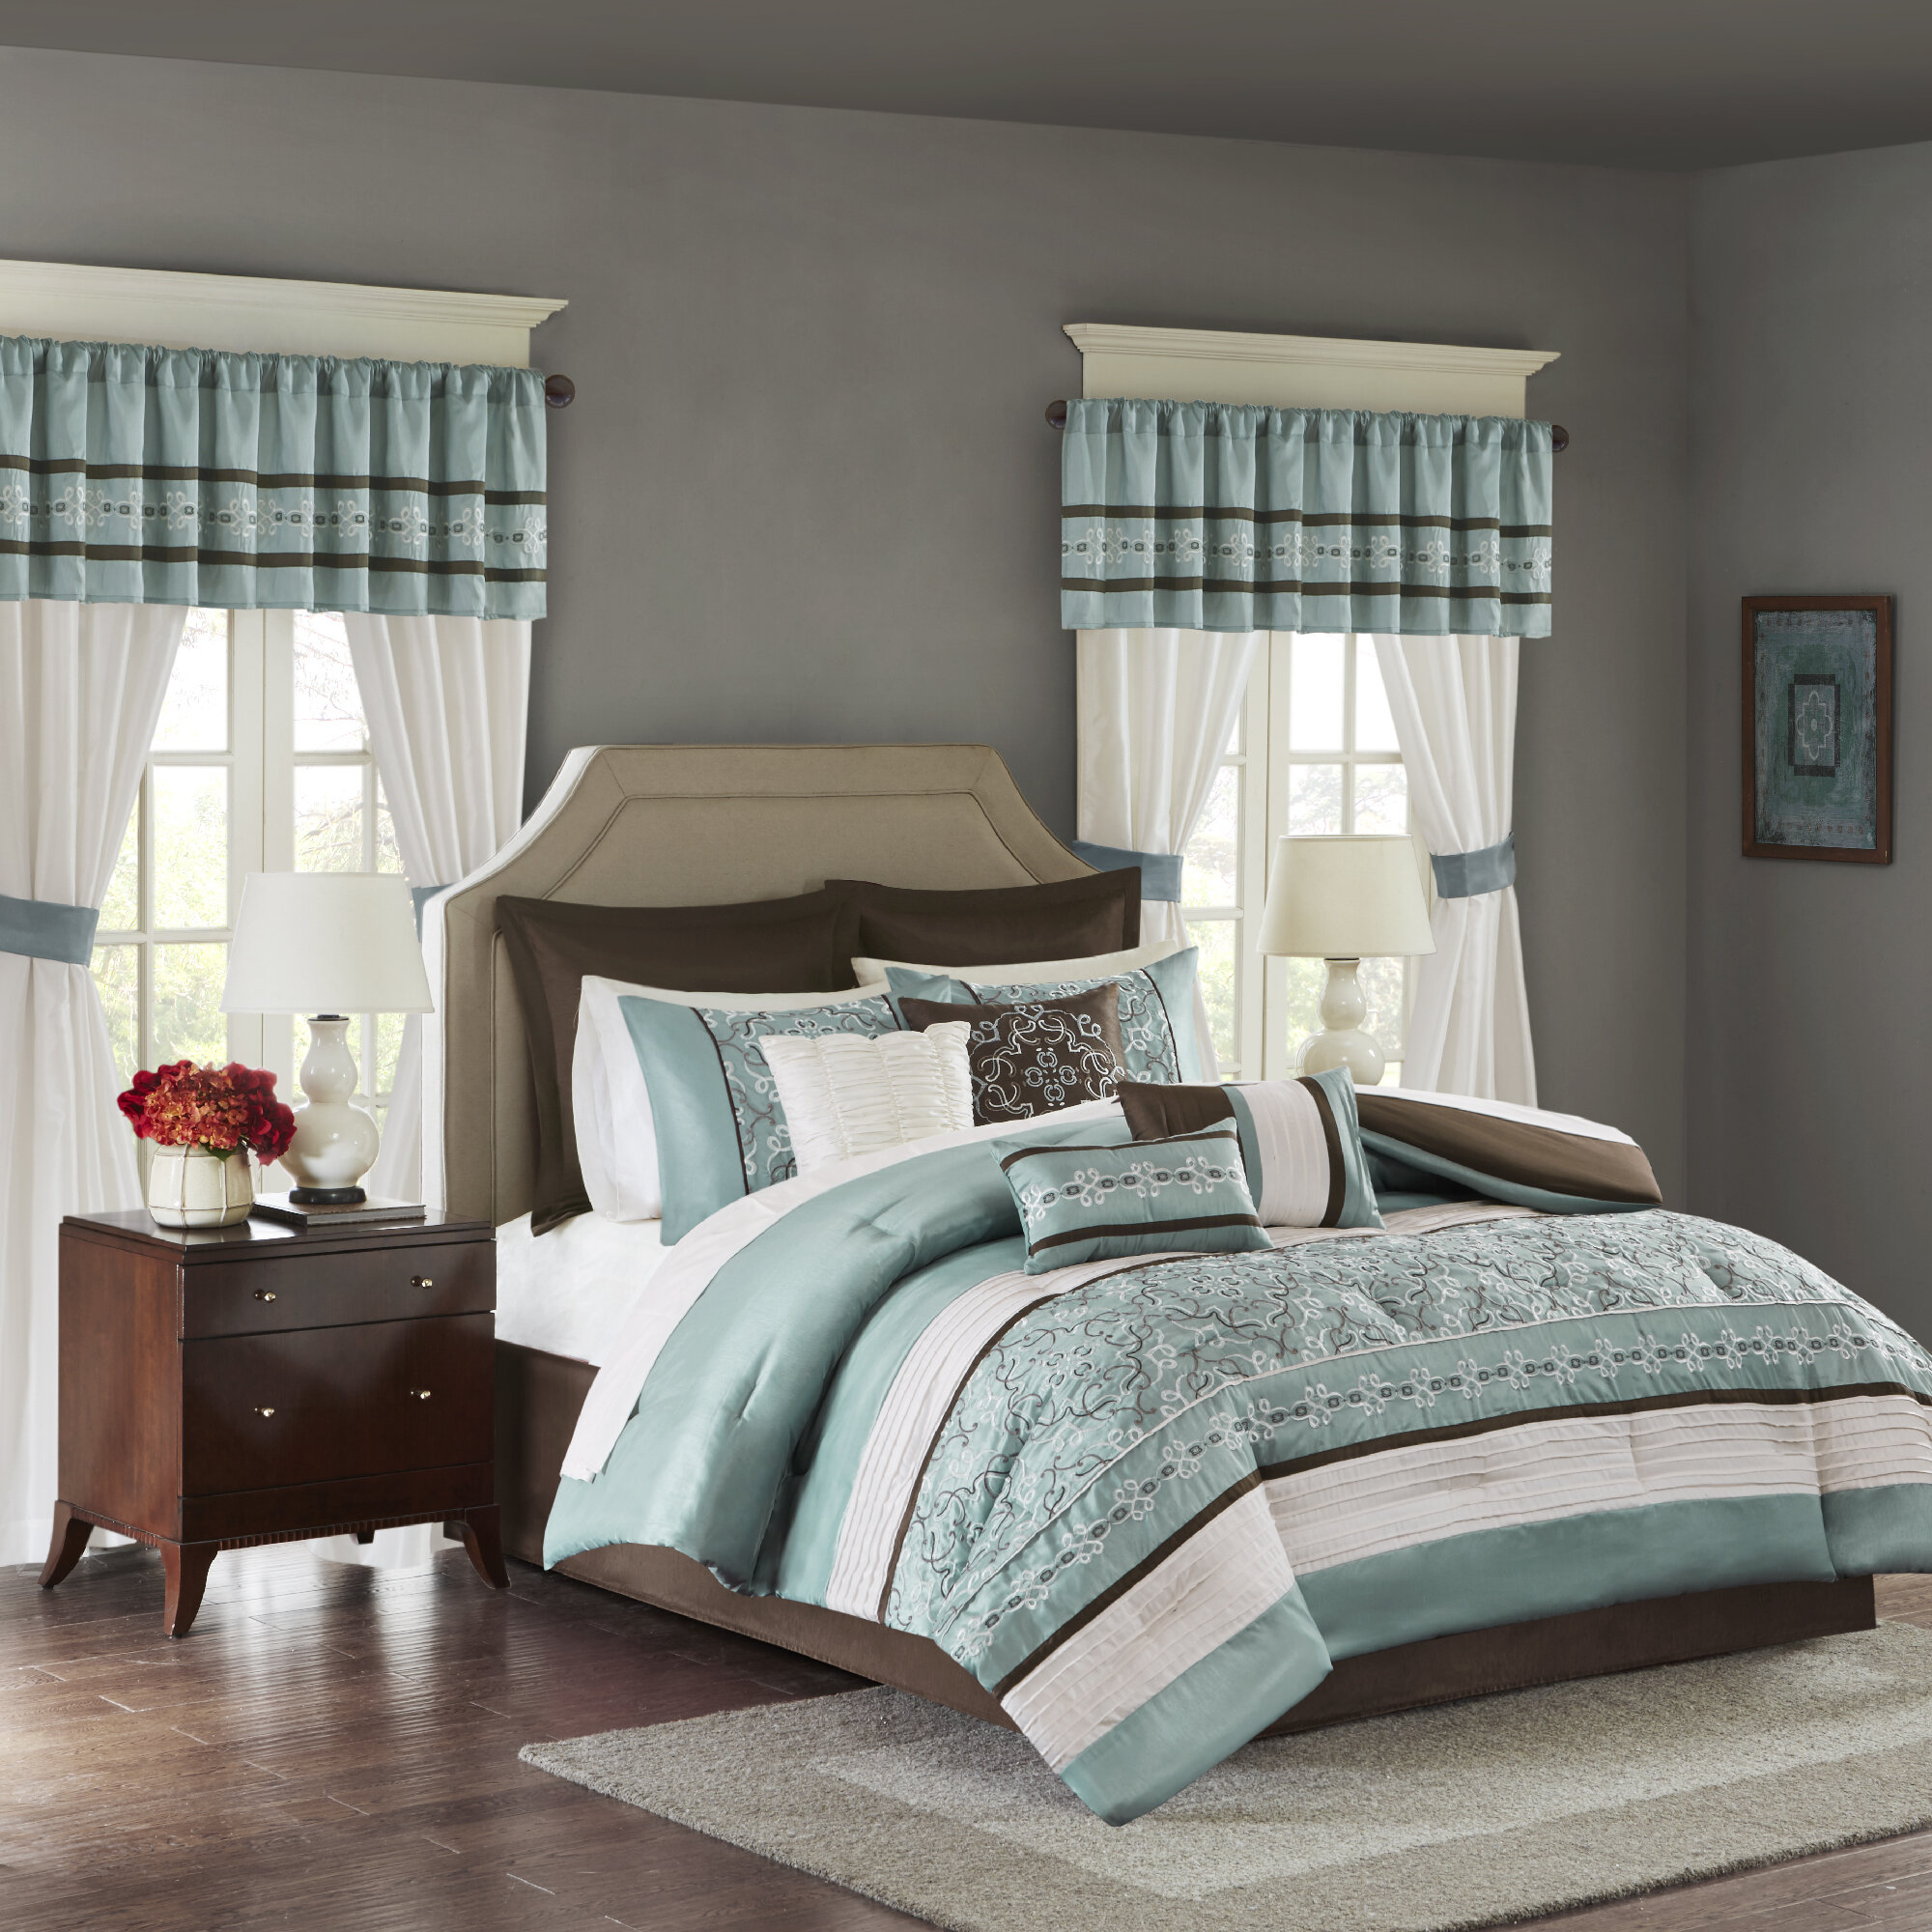 Bedding Sets With Curtains Drapes You Ll Love In 2021 Wayfair